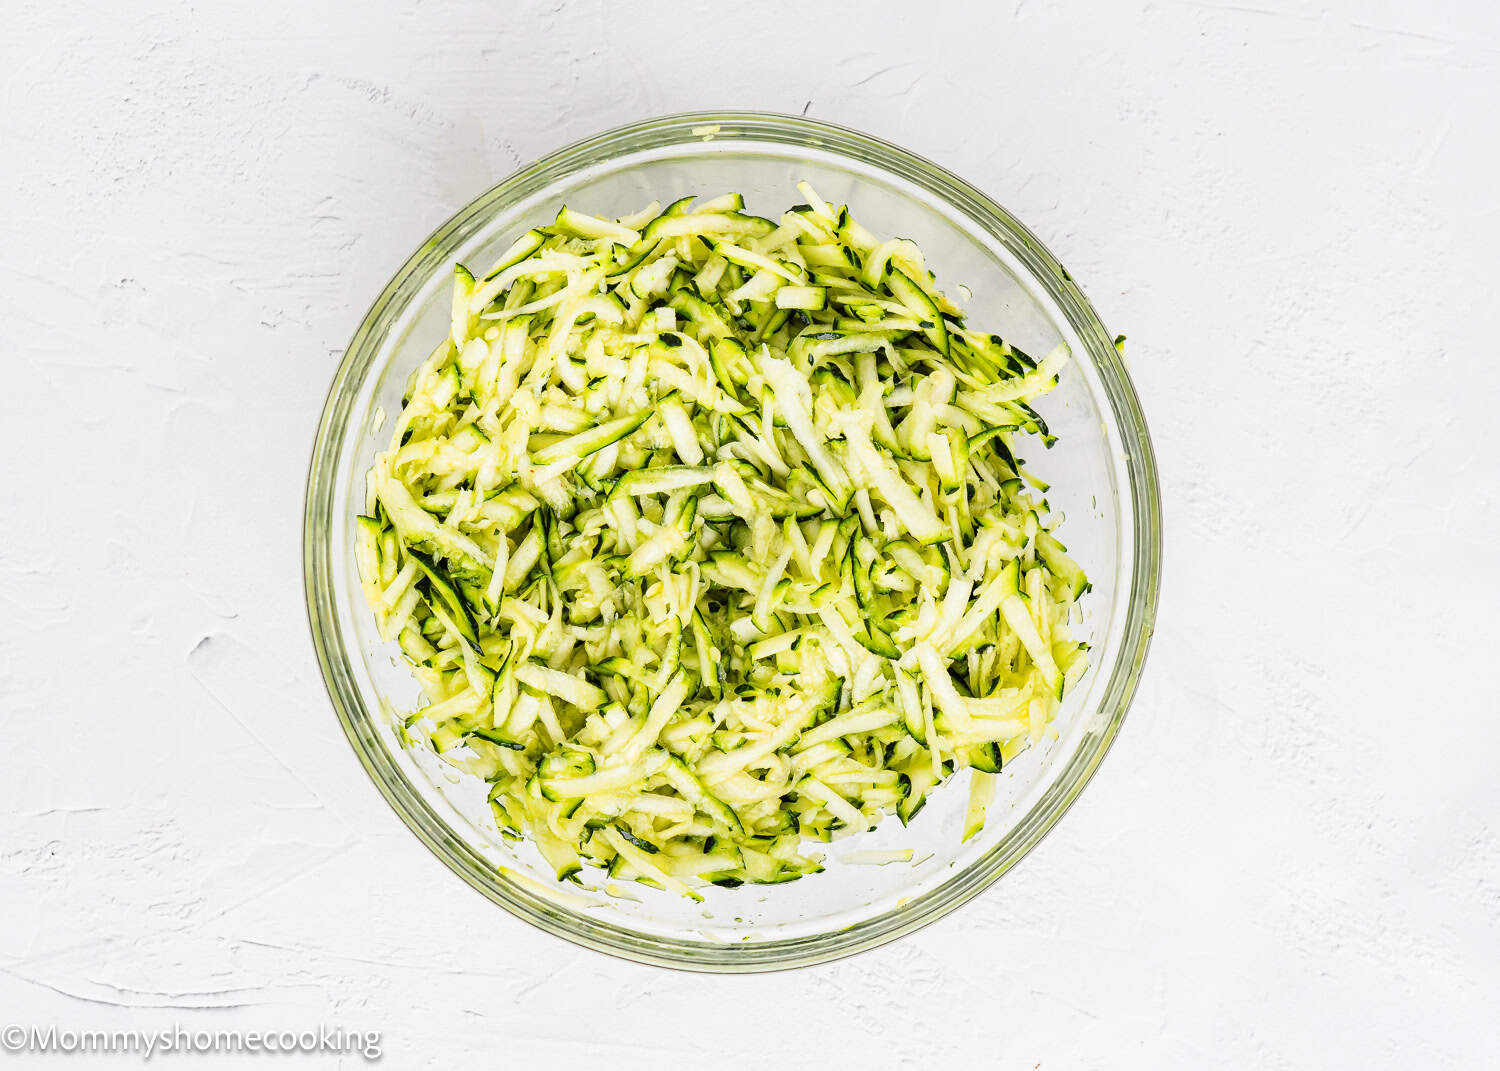 grated zucchinis to make Eggless Zucchini Fritters in a bowl.